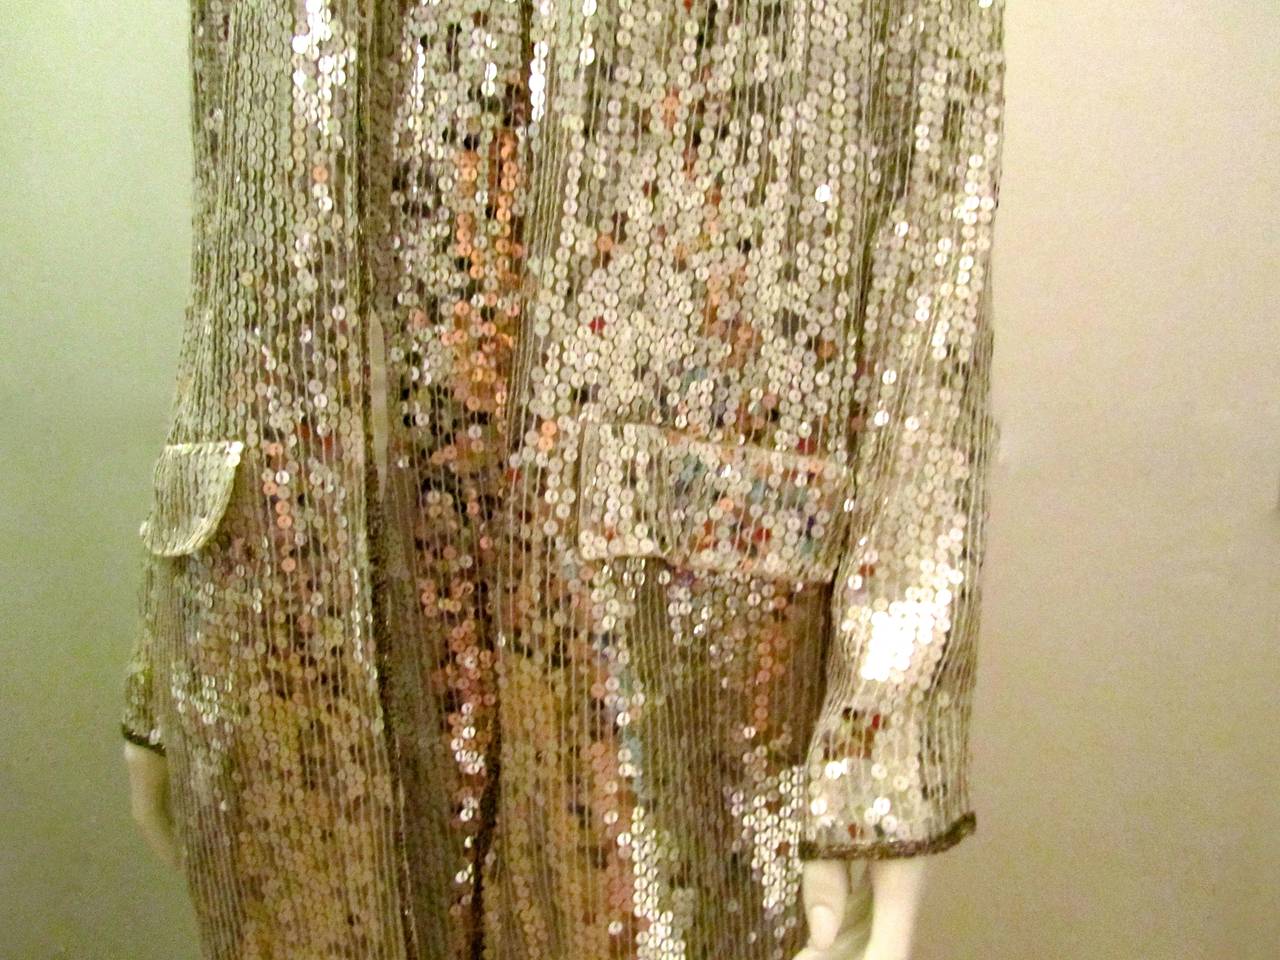 Dynamite 2 Piece Sequin Cocktail Dress with Jacket - Disco Era In Excellent Condition For Sale In Boca Raton, FL